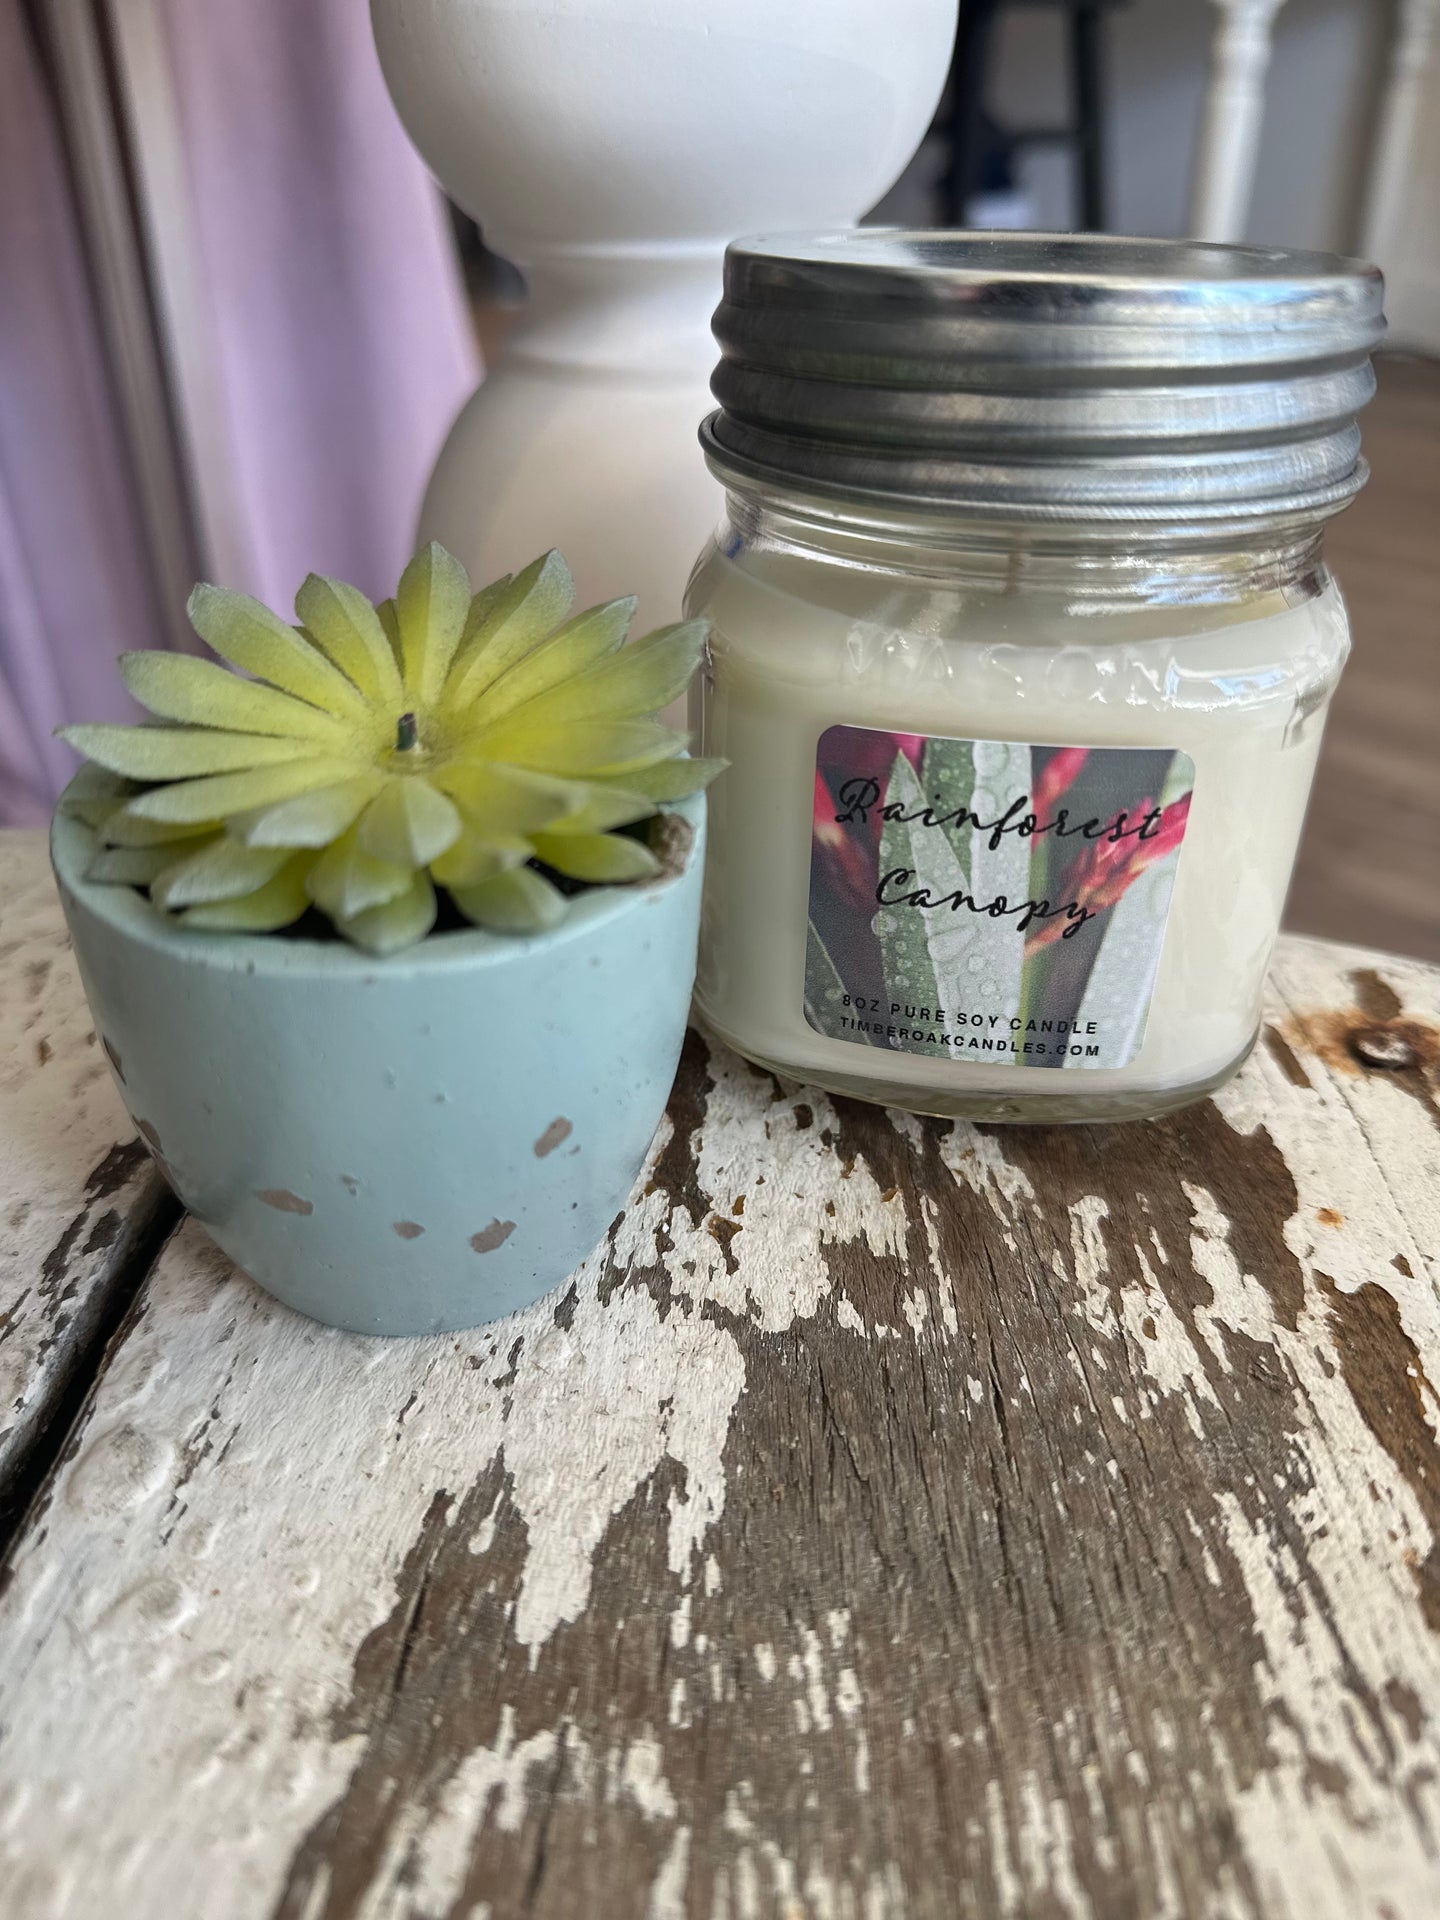 Rainforest Canopy Soy Candles